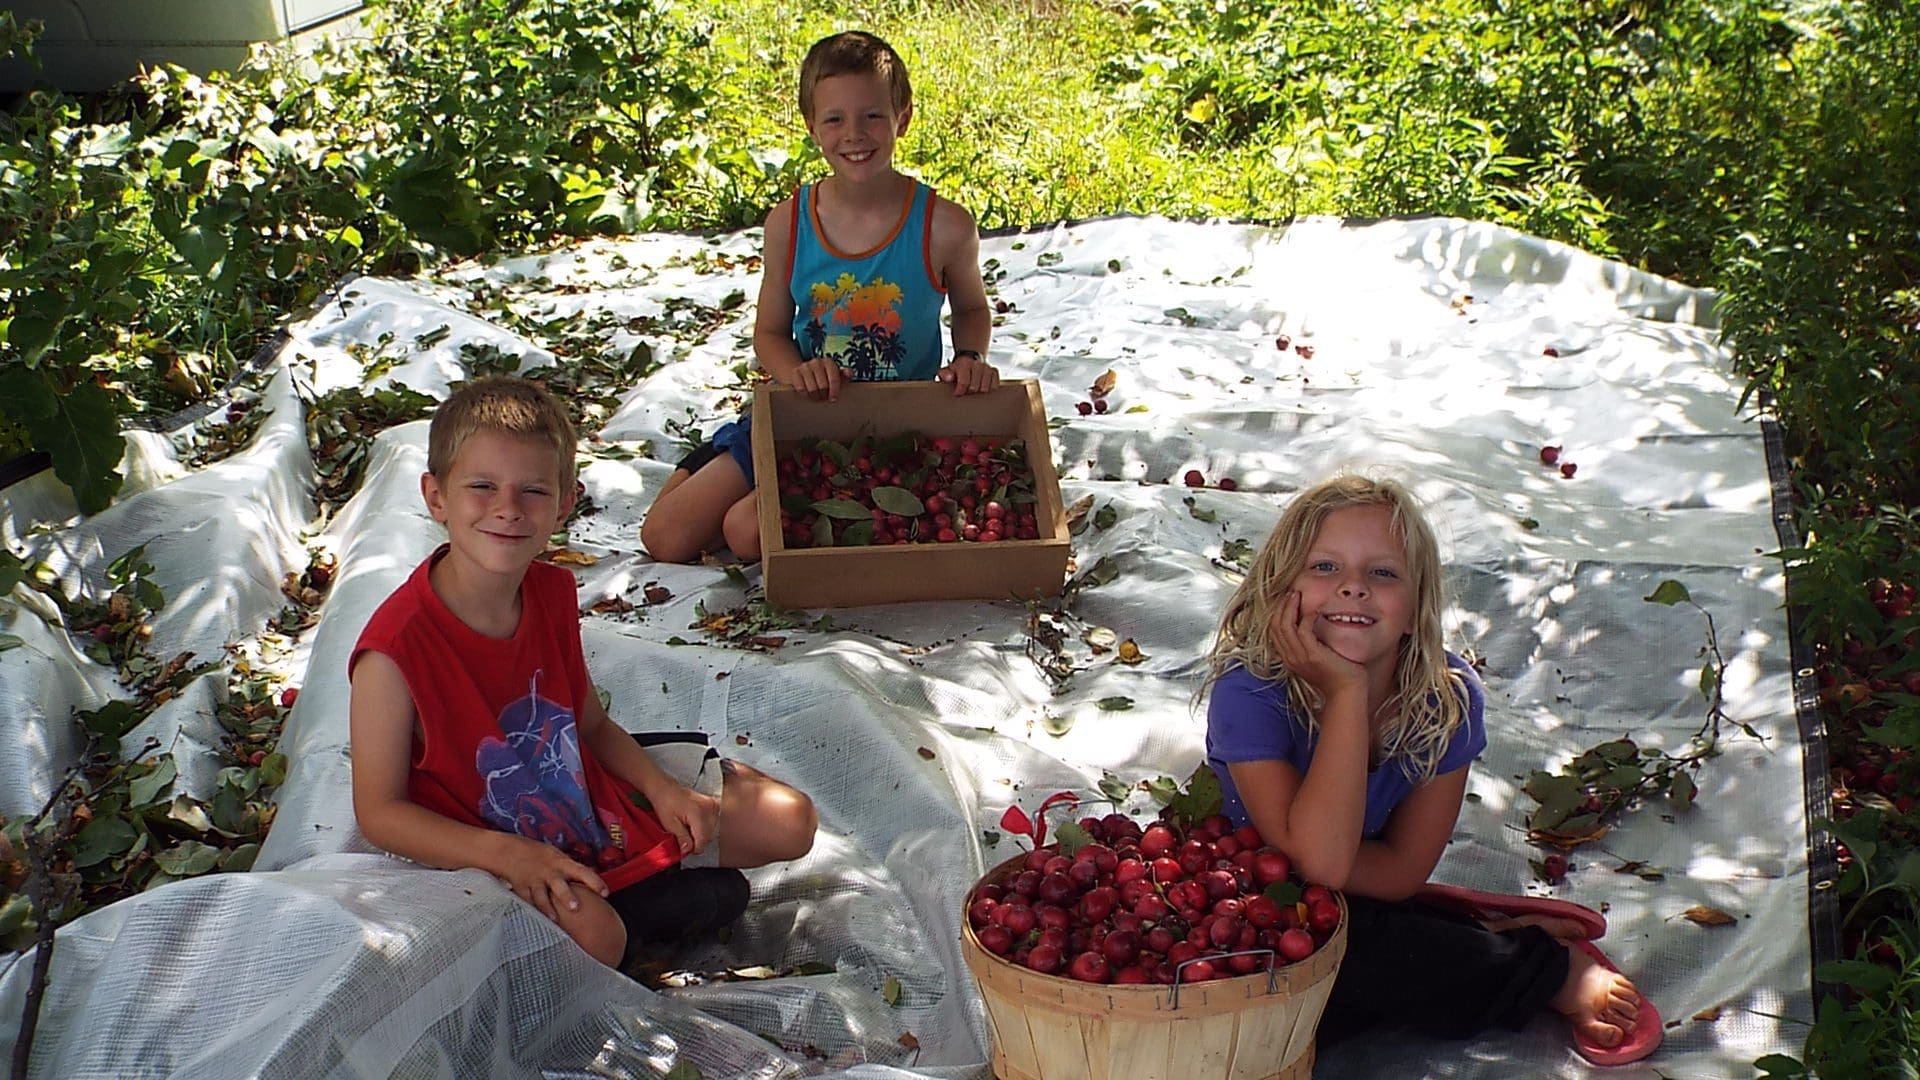 The kids helped with the harvest.  Our preferred method is to place a clean tarp under the tree and then to shake the branches to dislodge ripe fruit.